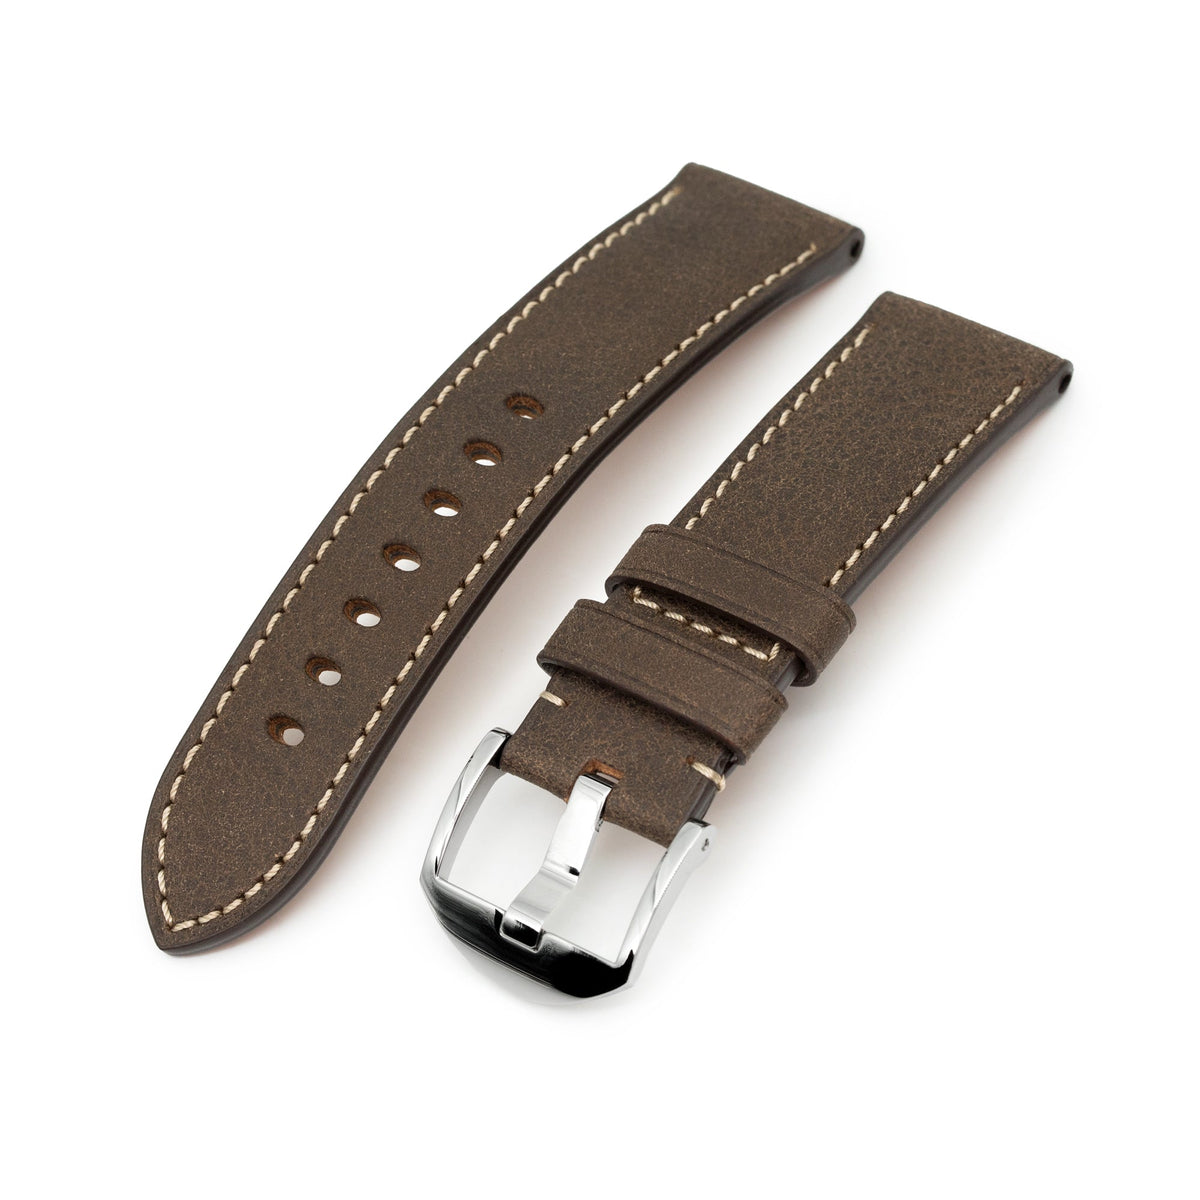 Pam Collection, Dark Brown Italian Leather Watch Strap for Panerai, Beige Stitching Strapcode watch bands